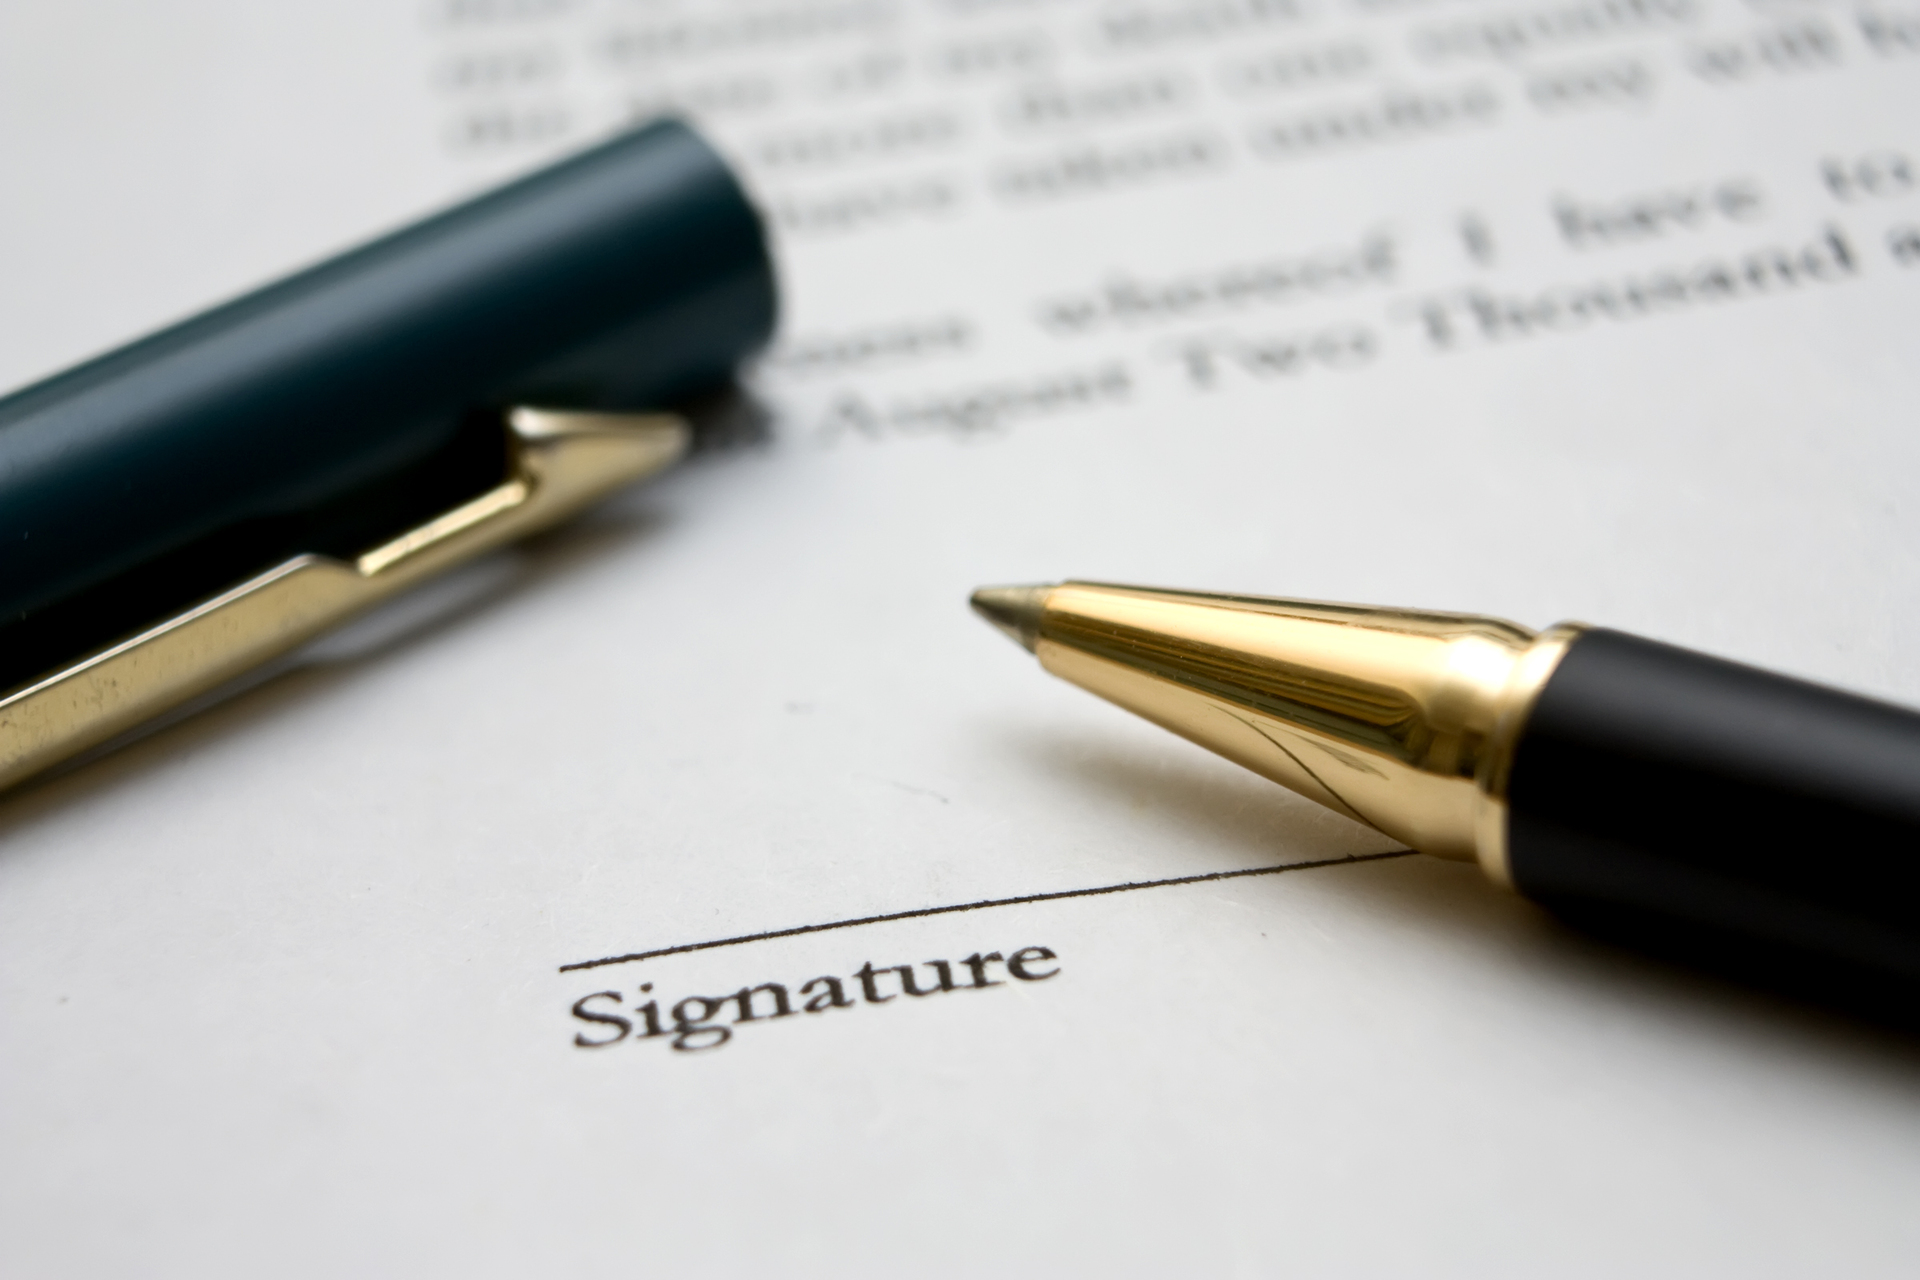 to-sign-a-contract-3-1236622-1920x1280